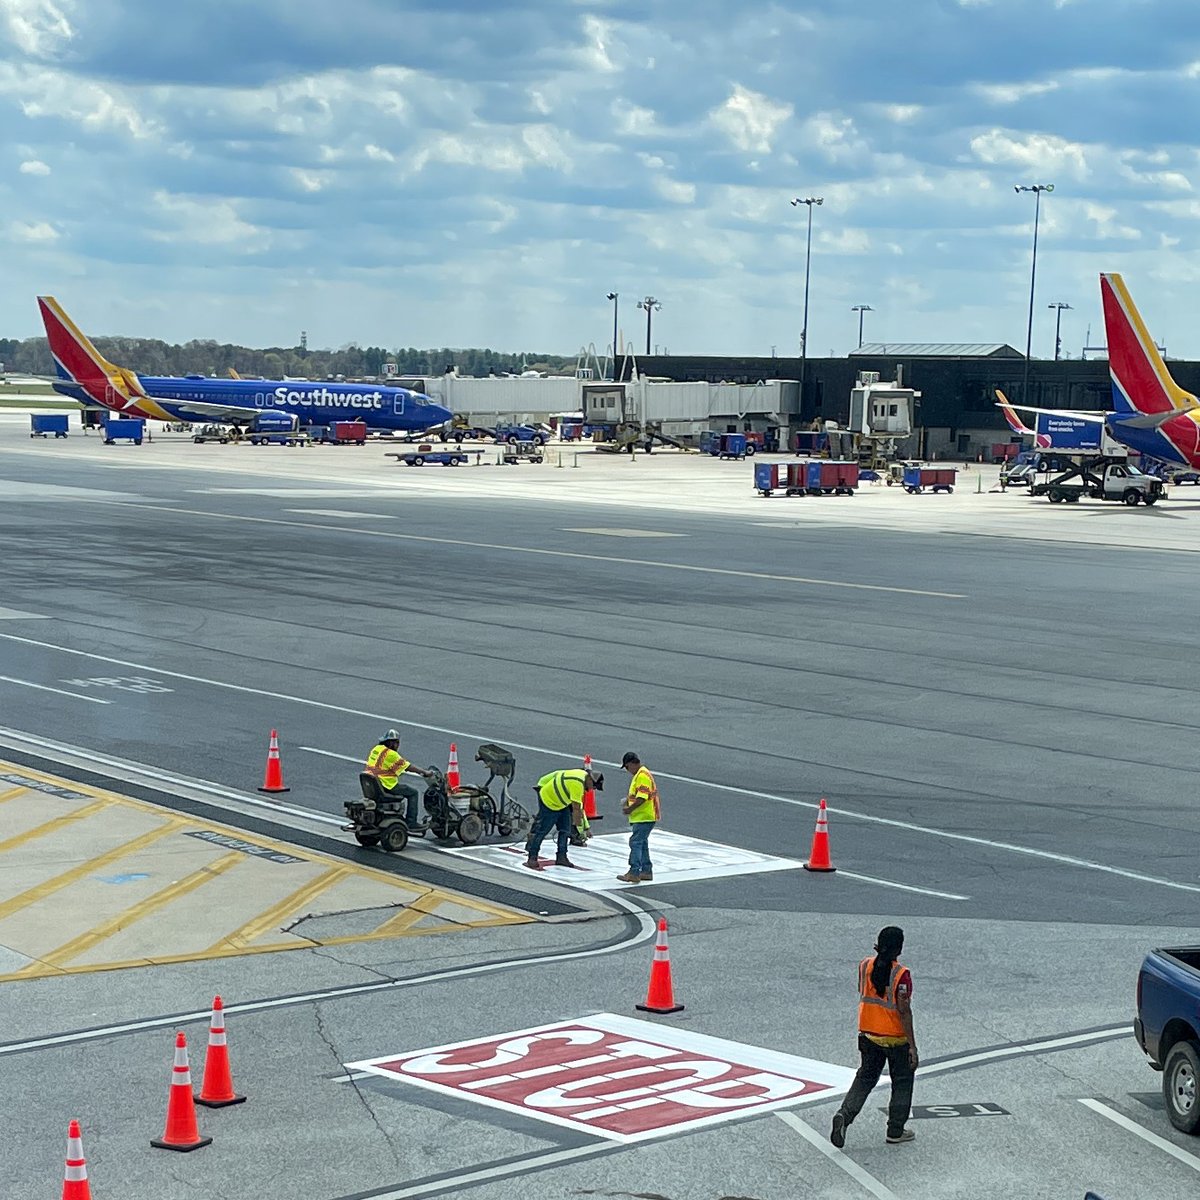 Cheers to refreshed airfield markings! Navigational aids on runways, taxiways and other airfield surfaces are monitored and painted throughout the year to ensure safety and visibility. #WorkerWednesday #MDOTsafety #airports